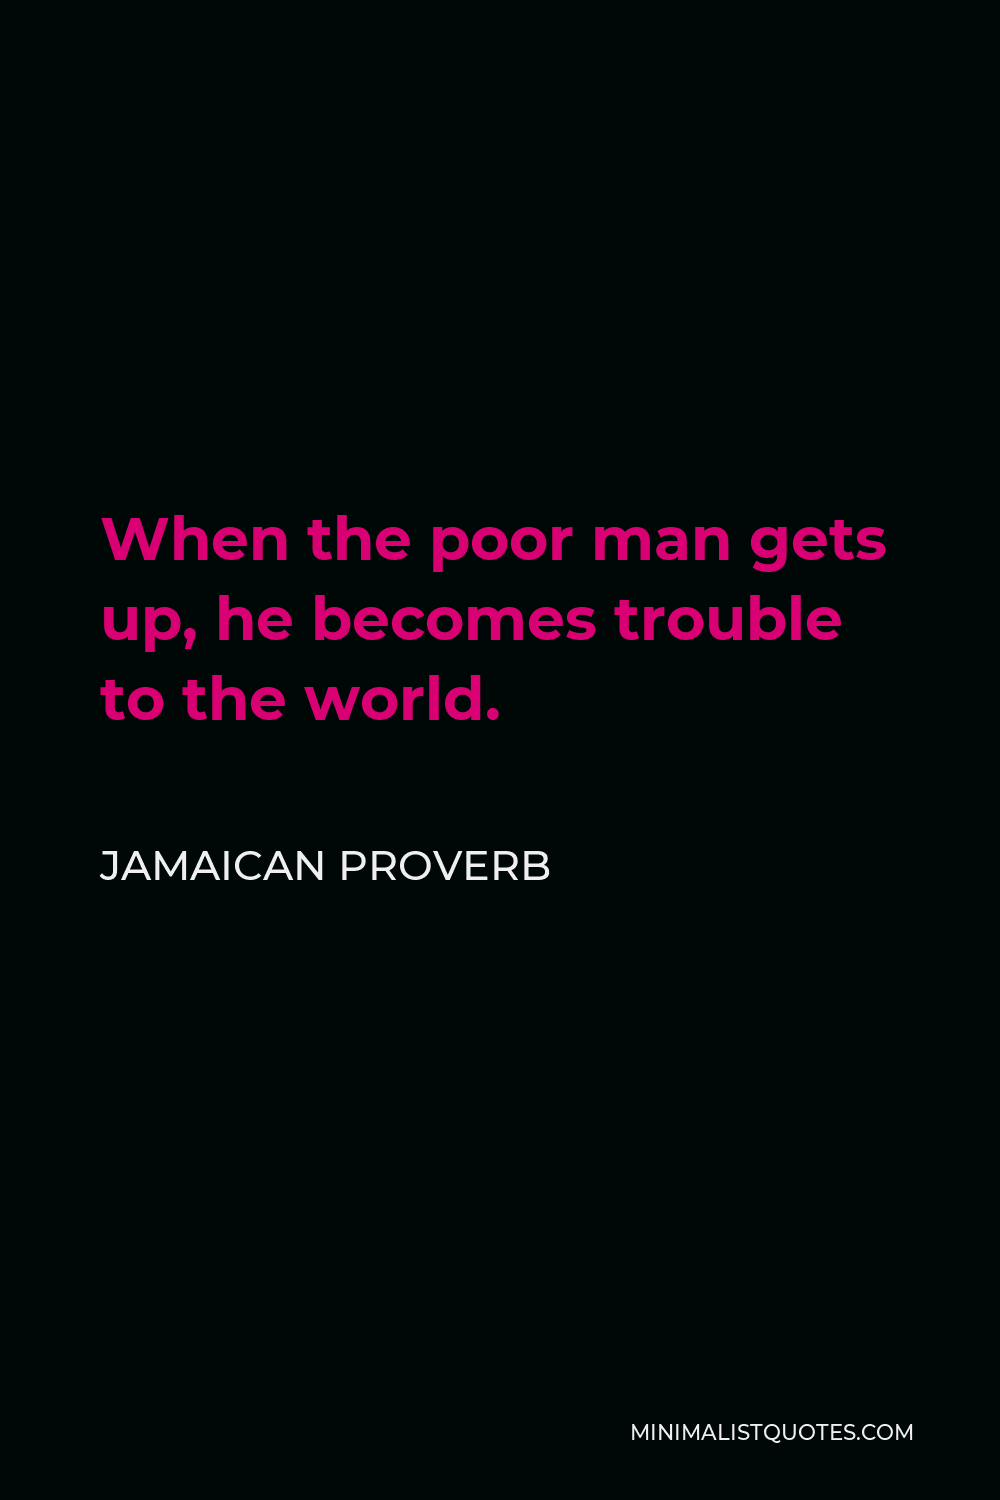 Jamaican Proverb Quote - When the poor man gets up, he becomes trouble to the world.